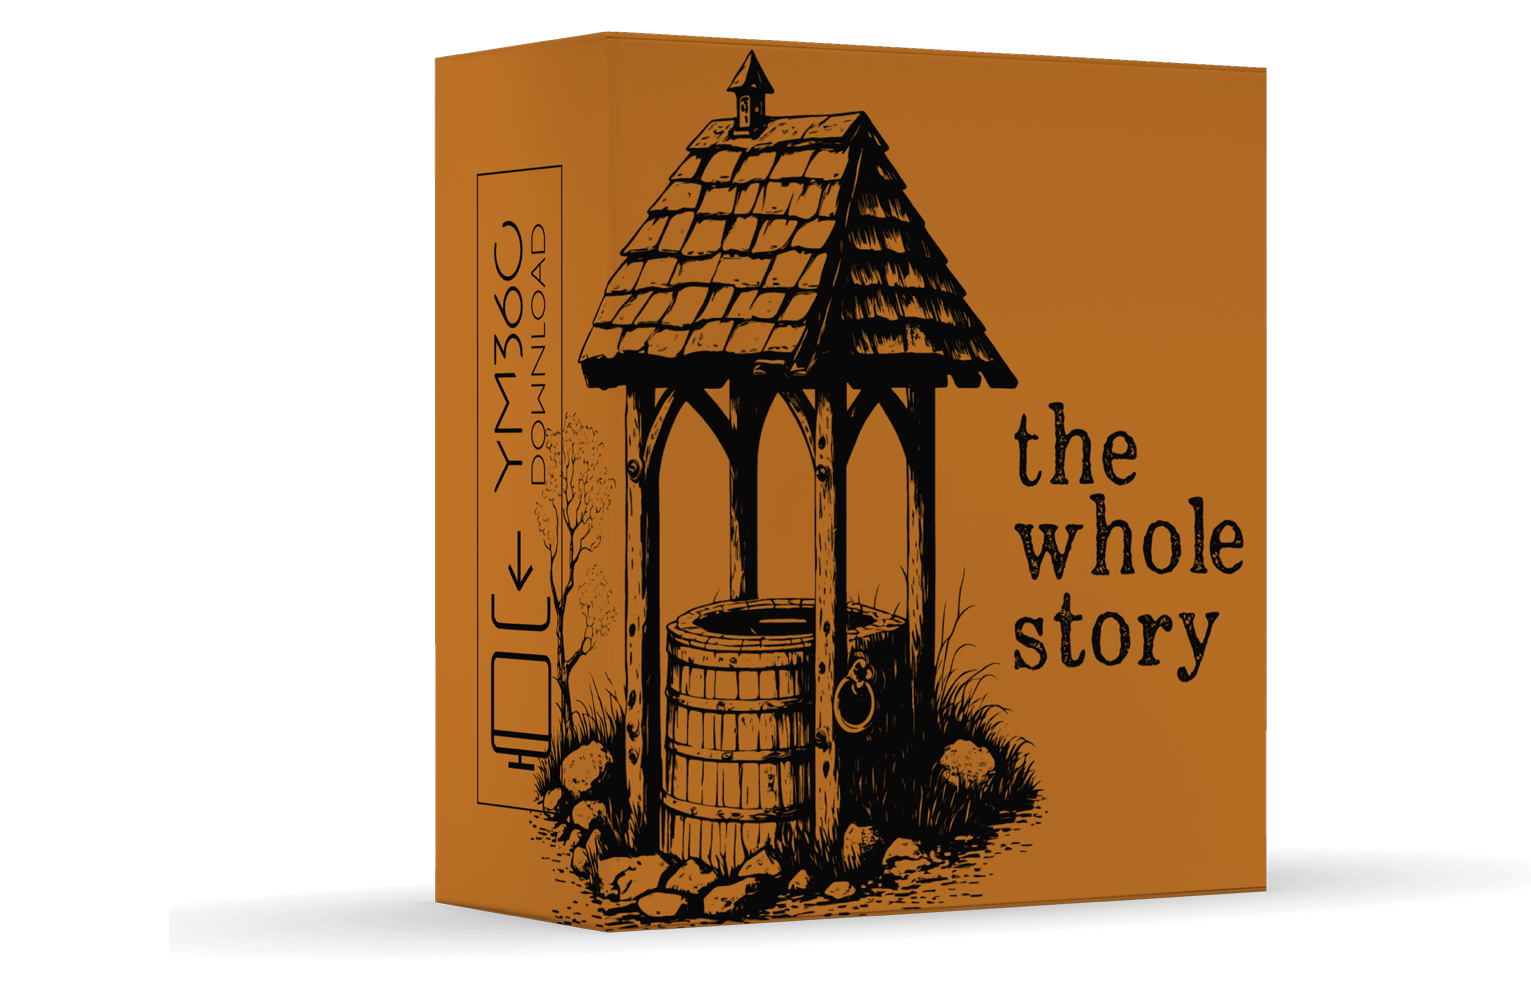 The Whole Story: A Story of Wholeness Vs. Separation